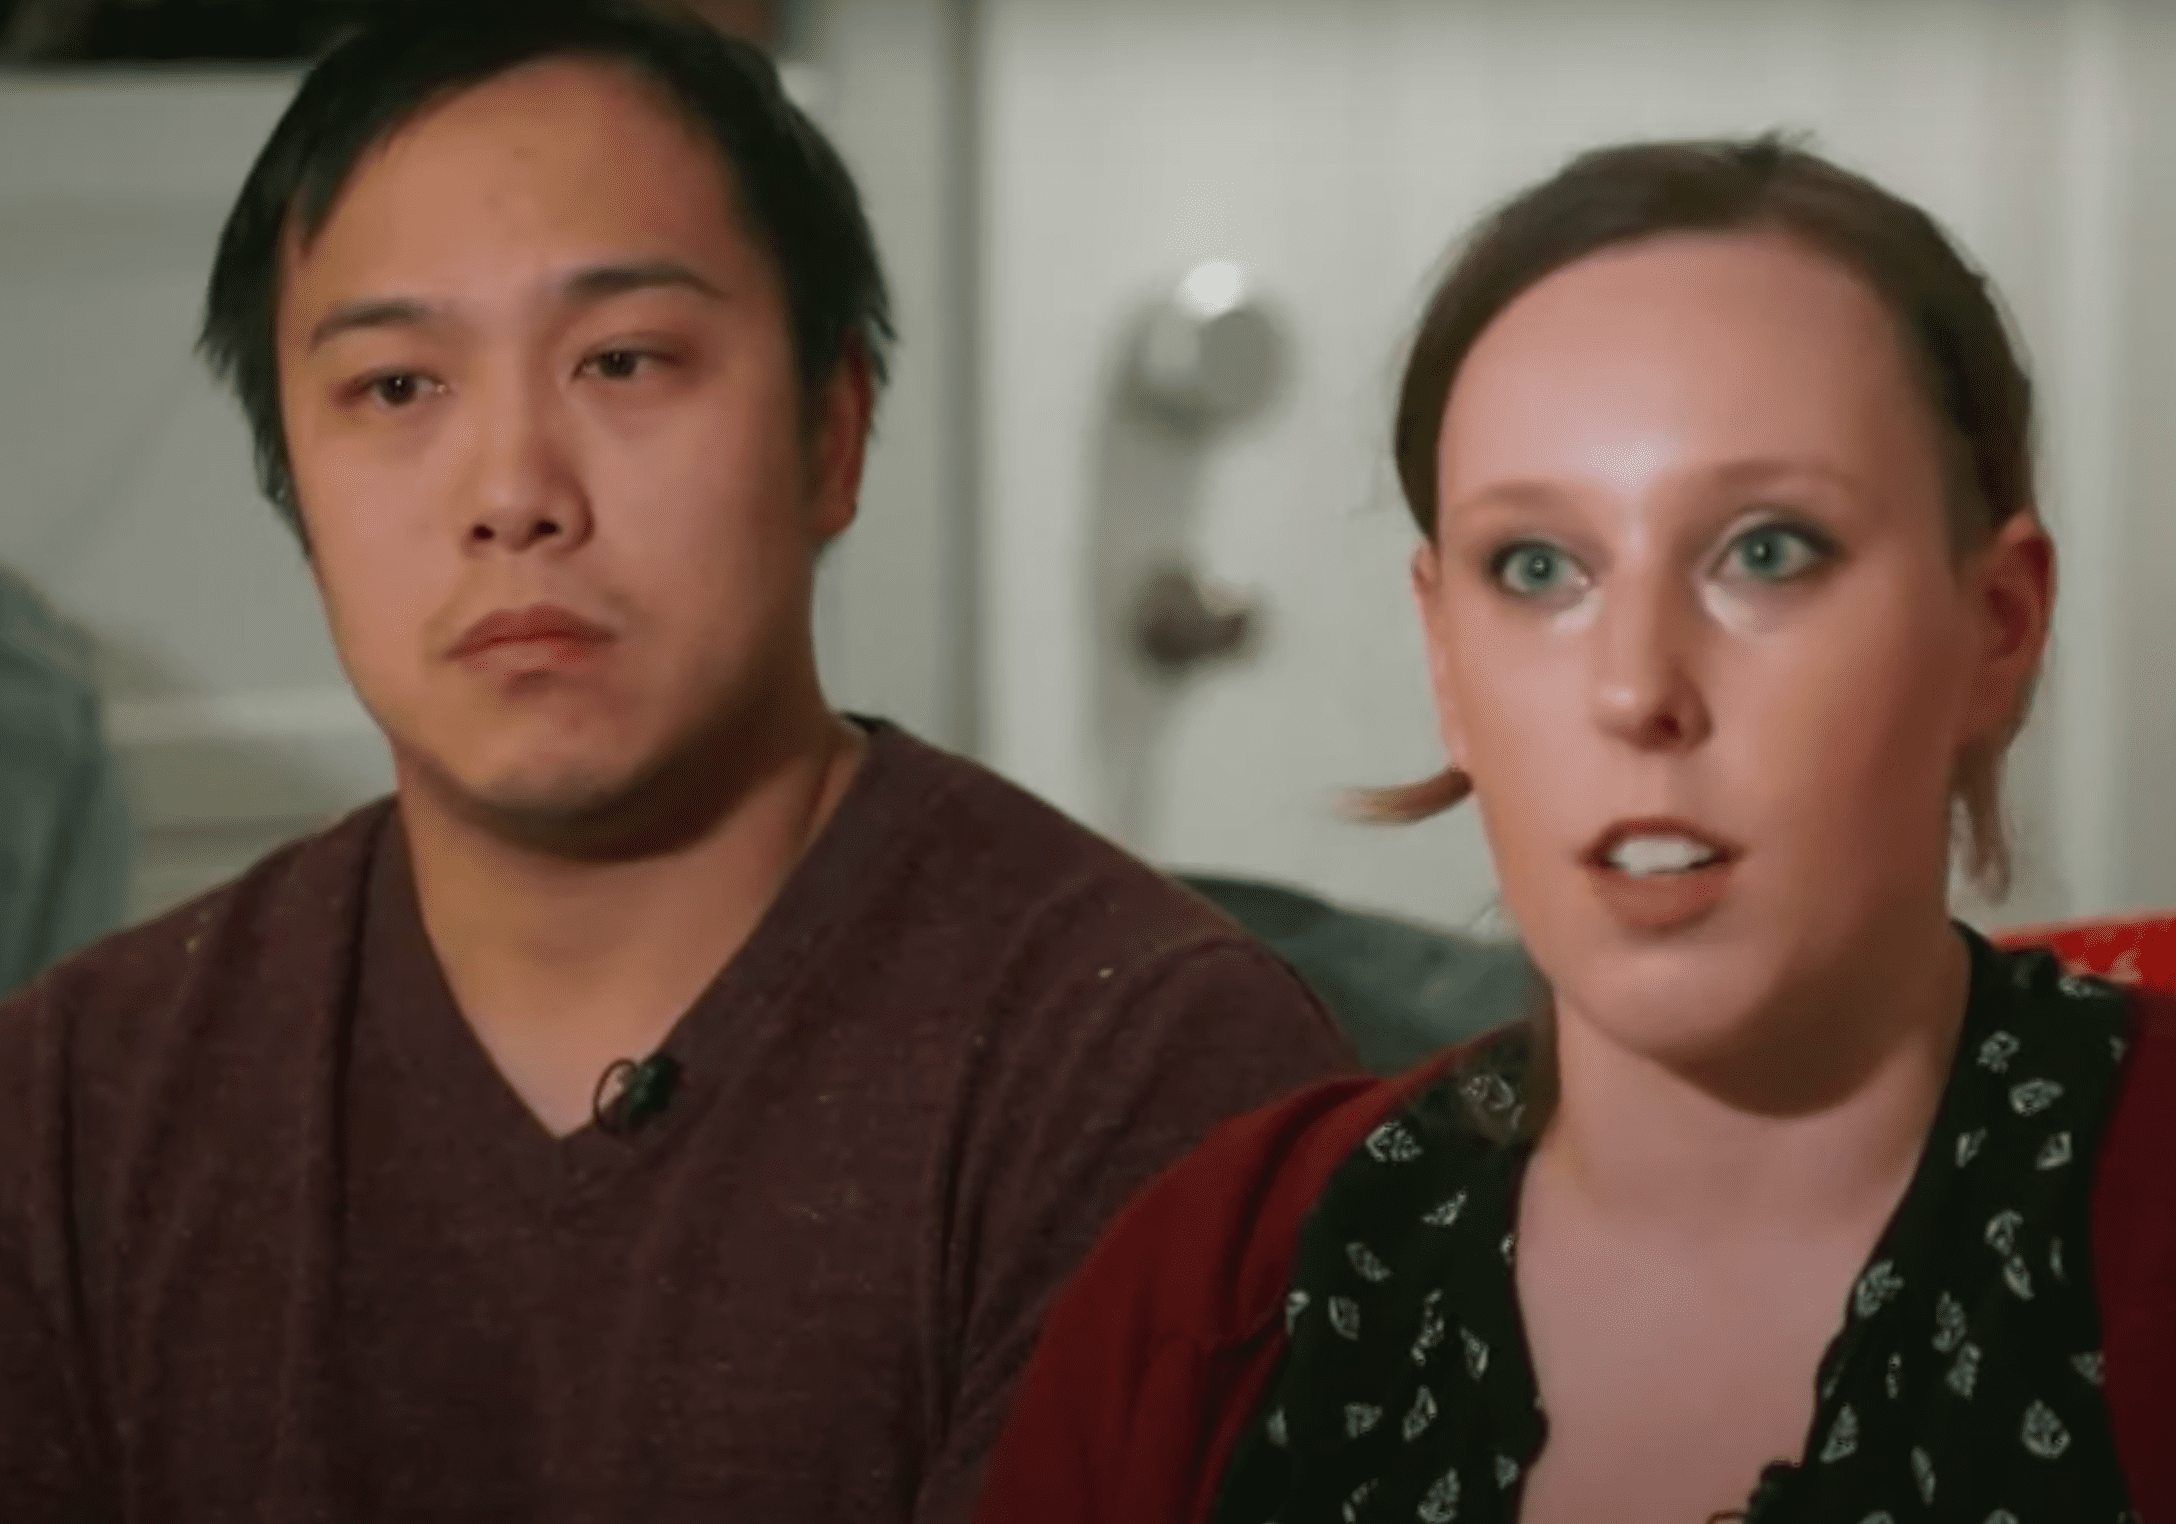 Parents Jo and John were shocked by their child's experience. | Source: youtube.com/KING 5